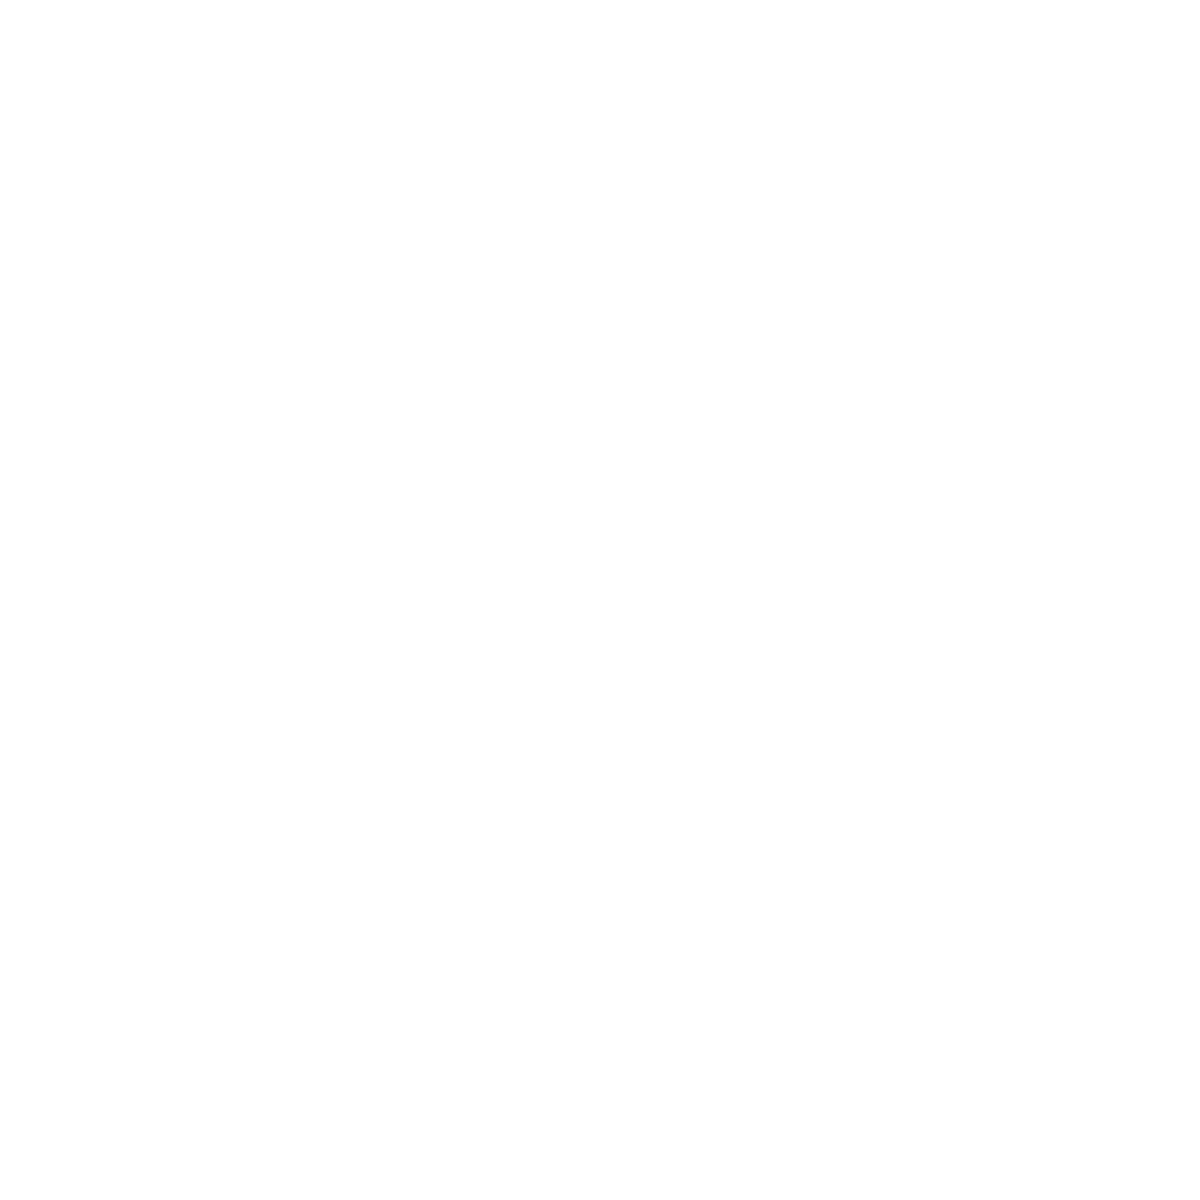 THE STAFFORD ROOM